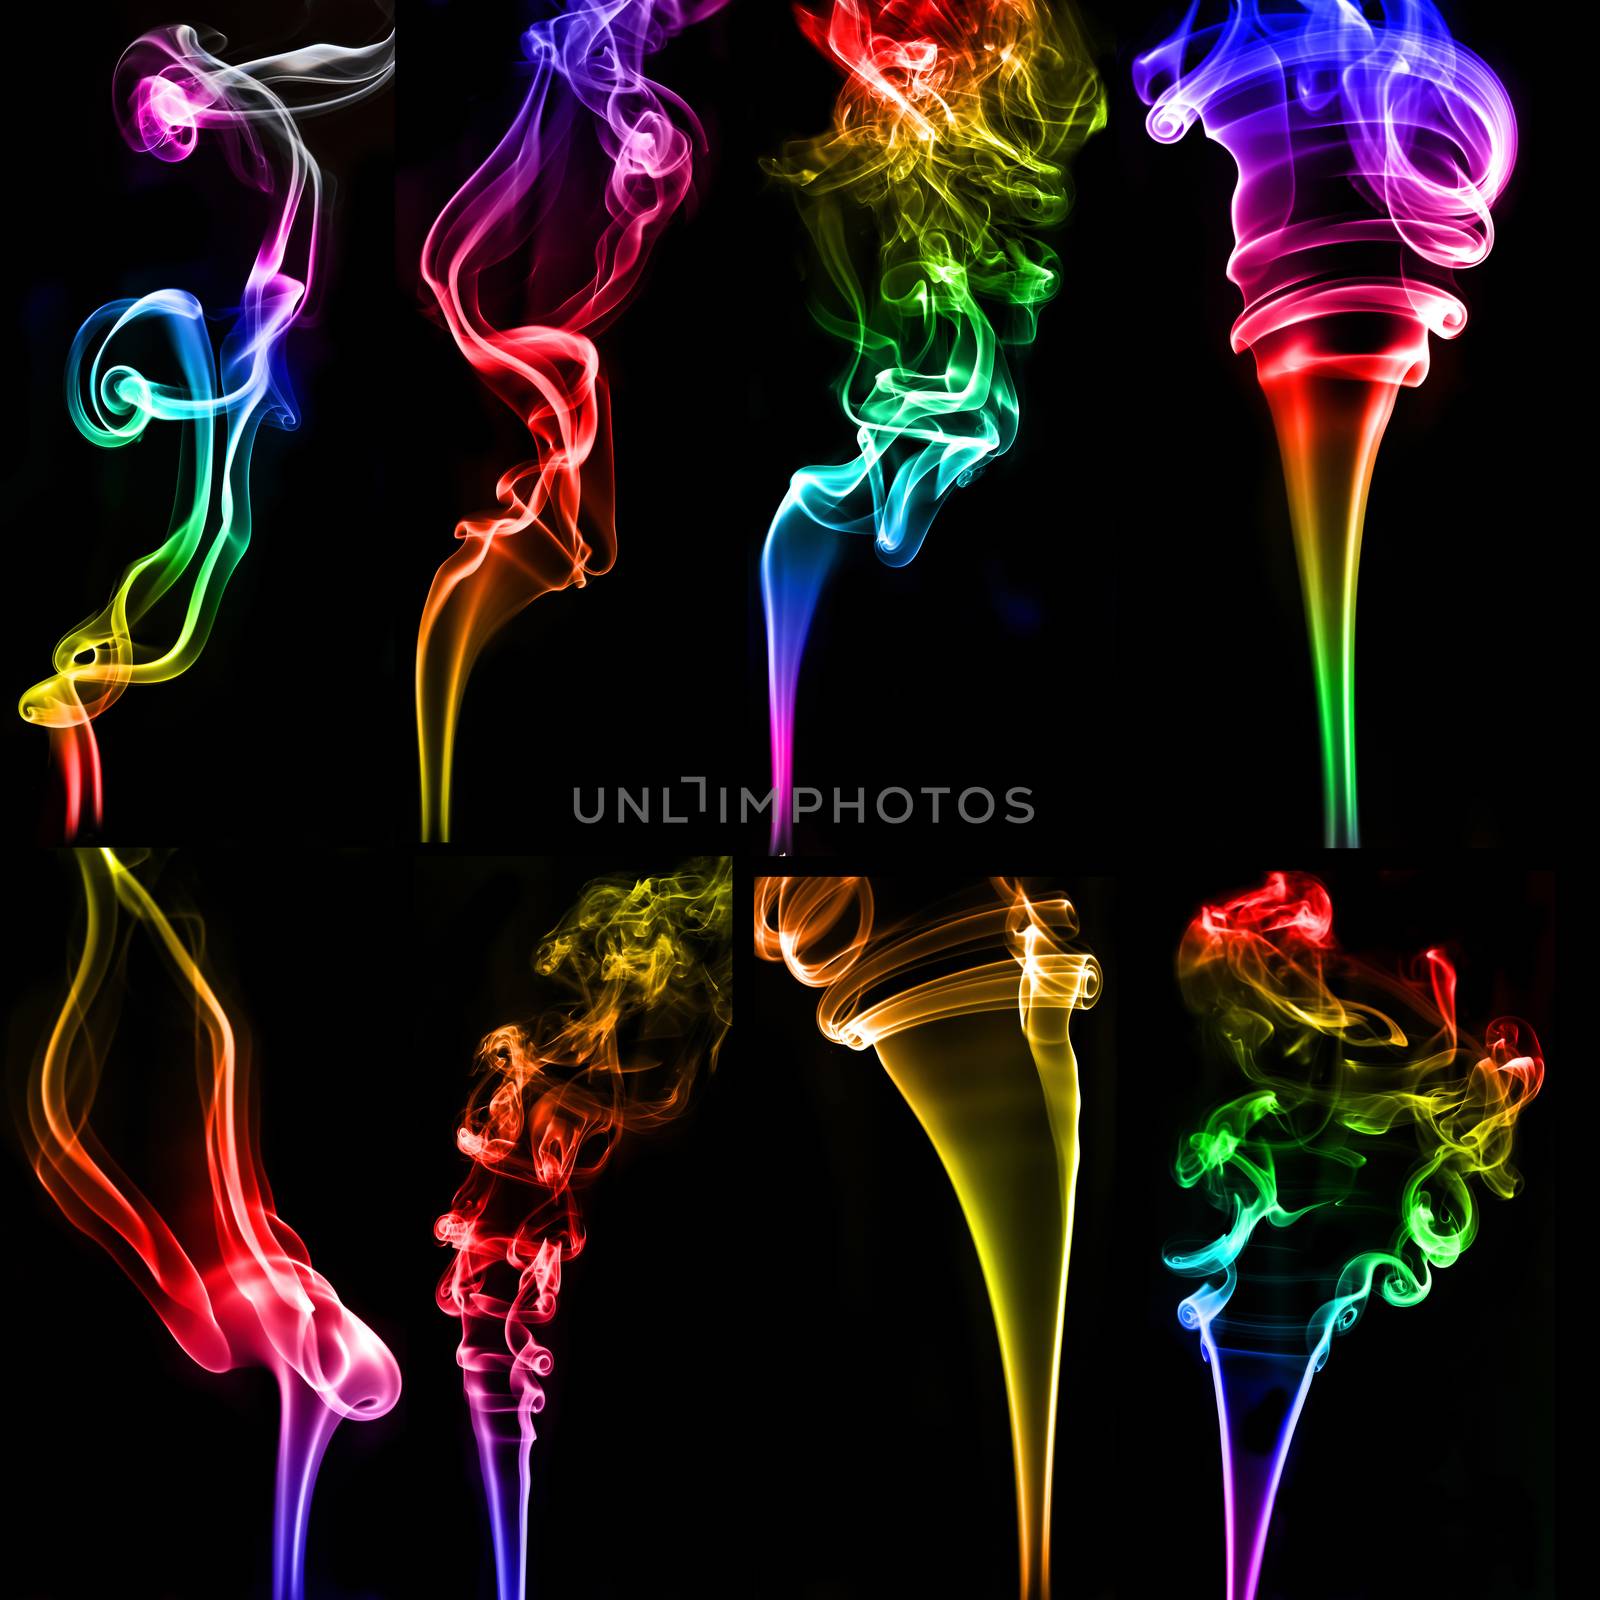 textured of colorful incense smoke on dark background